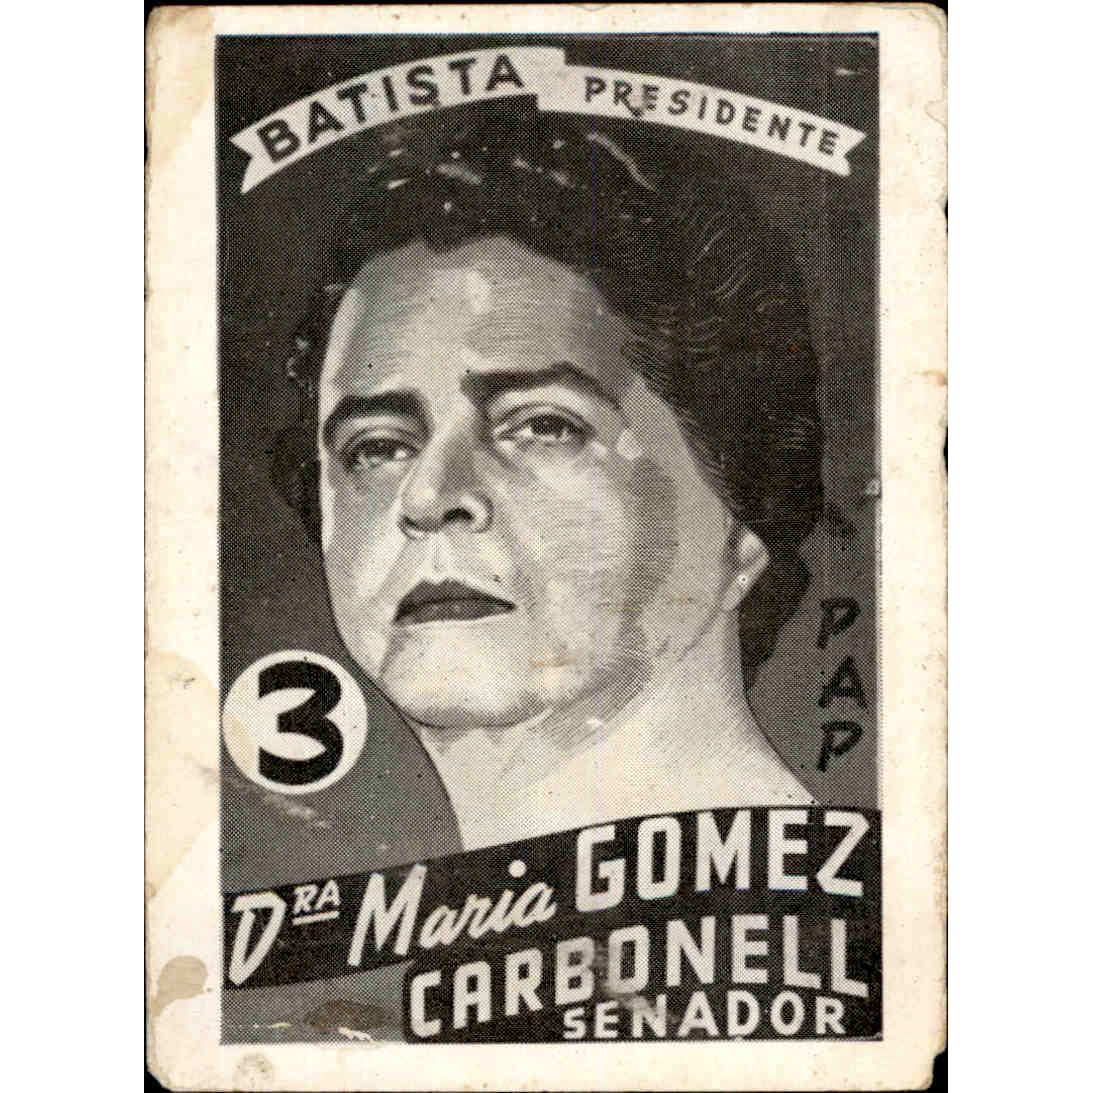 6/29/1903 — b. María Gómez Carbonell, Cuban gov official, educator, lawyer, author. The first woman to serve in the Cuban House of Representatives (1936-40), Cuban Senate(1940-44); member of the cabinet of Ministers. Founder, Alliance of Natl Feminists in Cuba #womenshistory #OTD